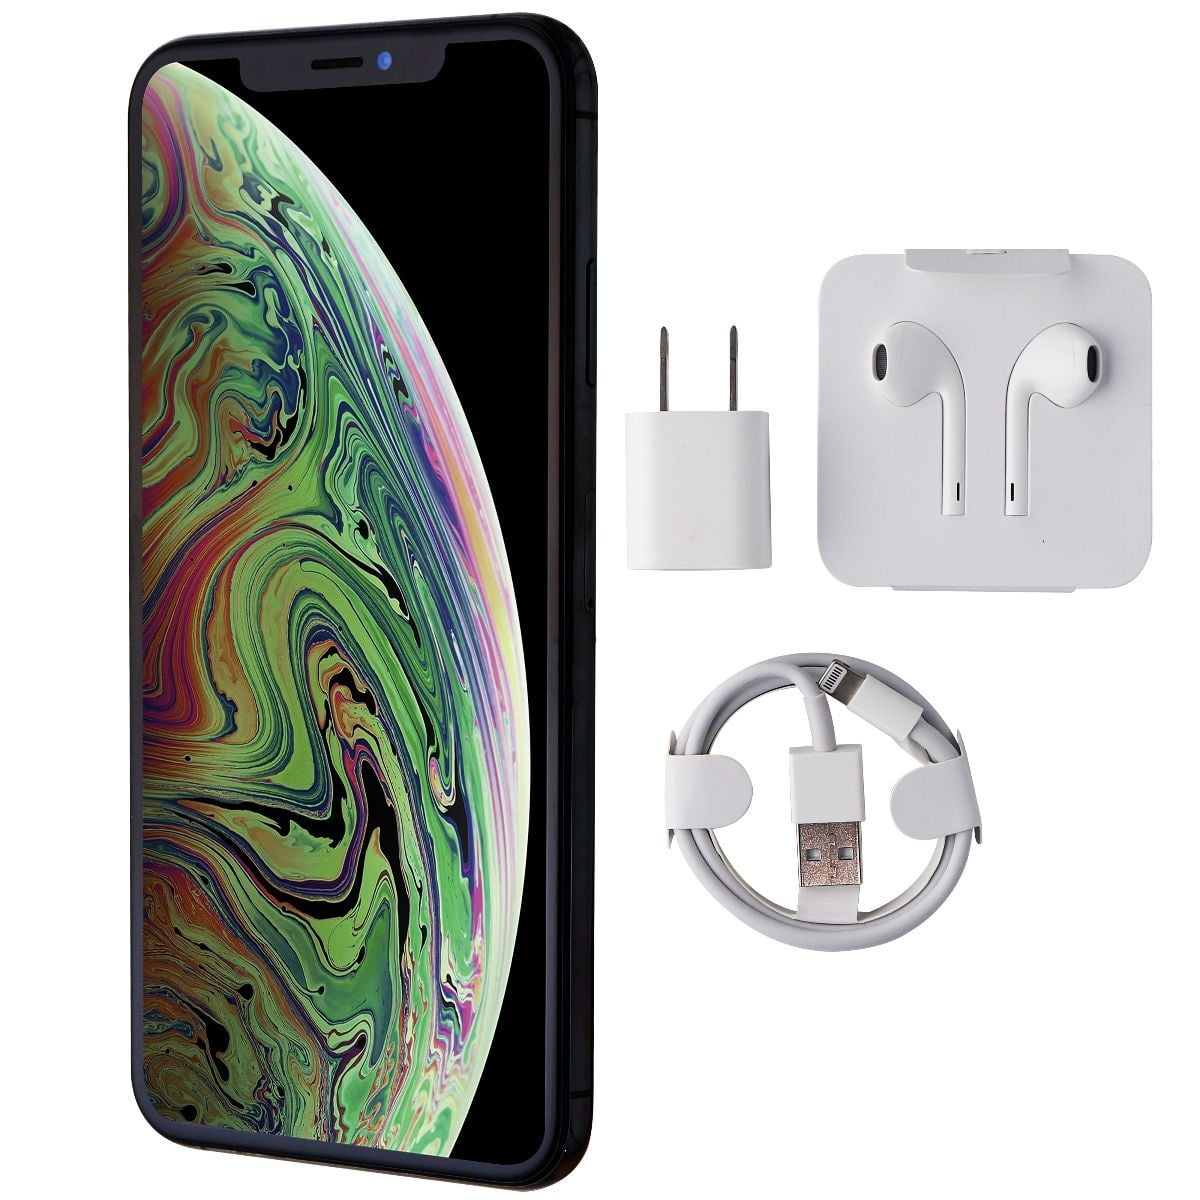 Apple iPhone XS Max 256GB Space Gray (AT&T) Refurbished A 